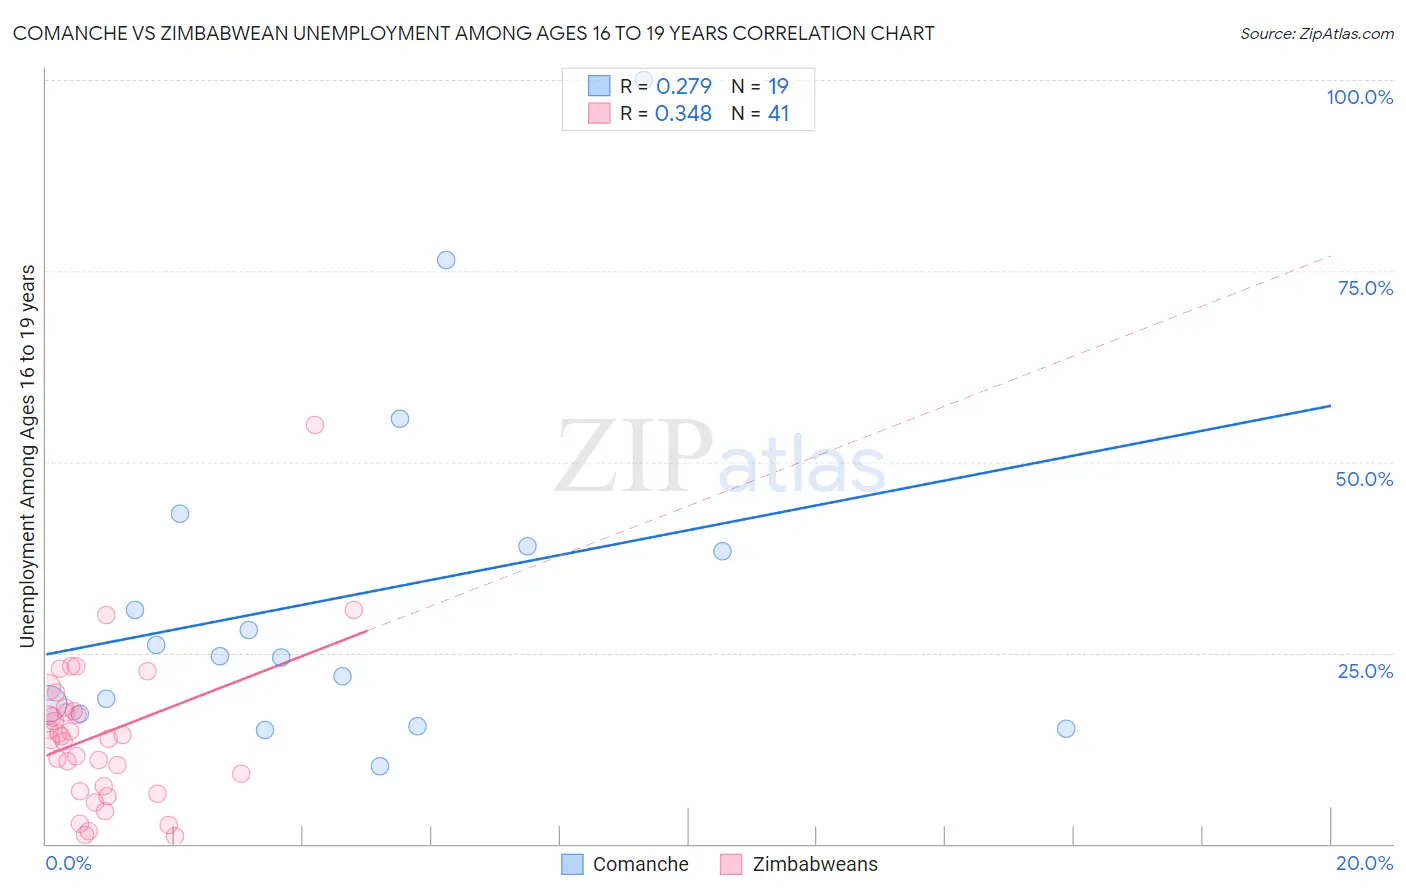 Comanche vs Zimbabwean Unemployment Among Ages 16 to 19 years